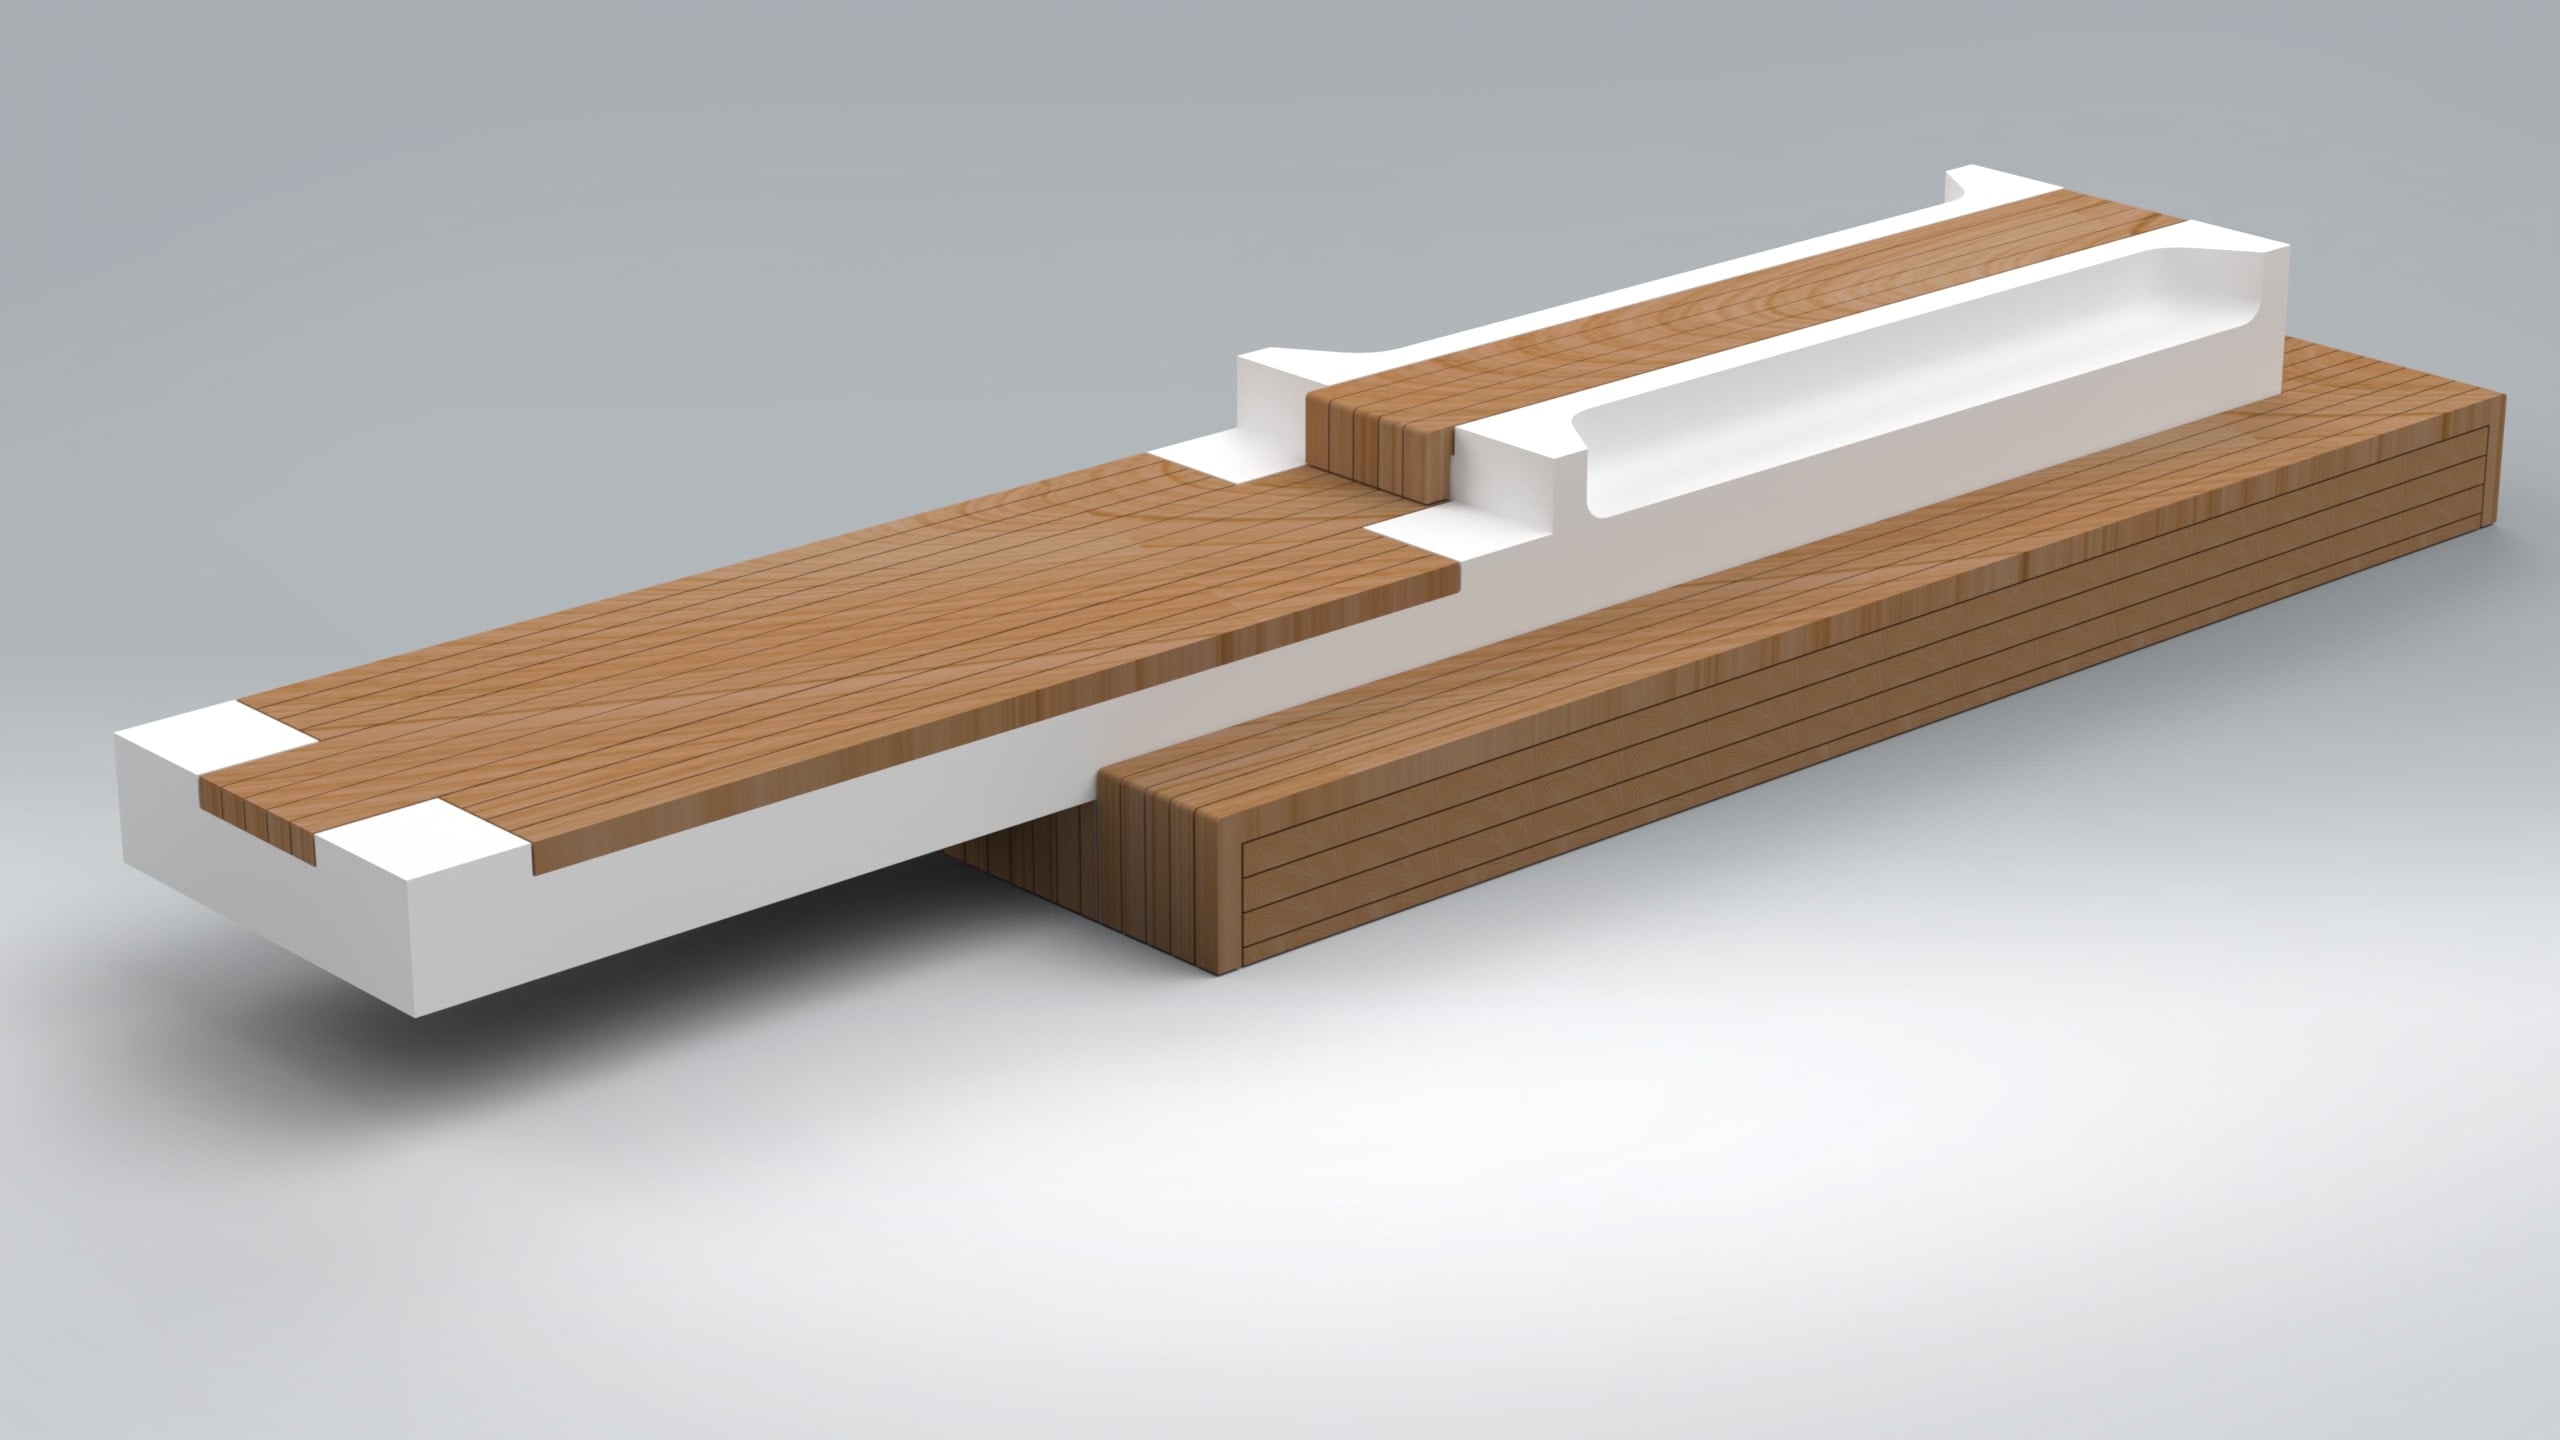 Cantilevered Urban Bench